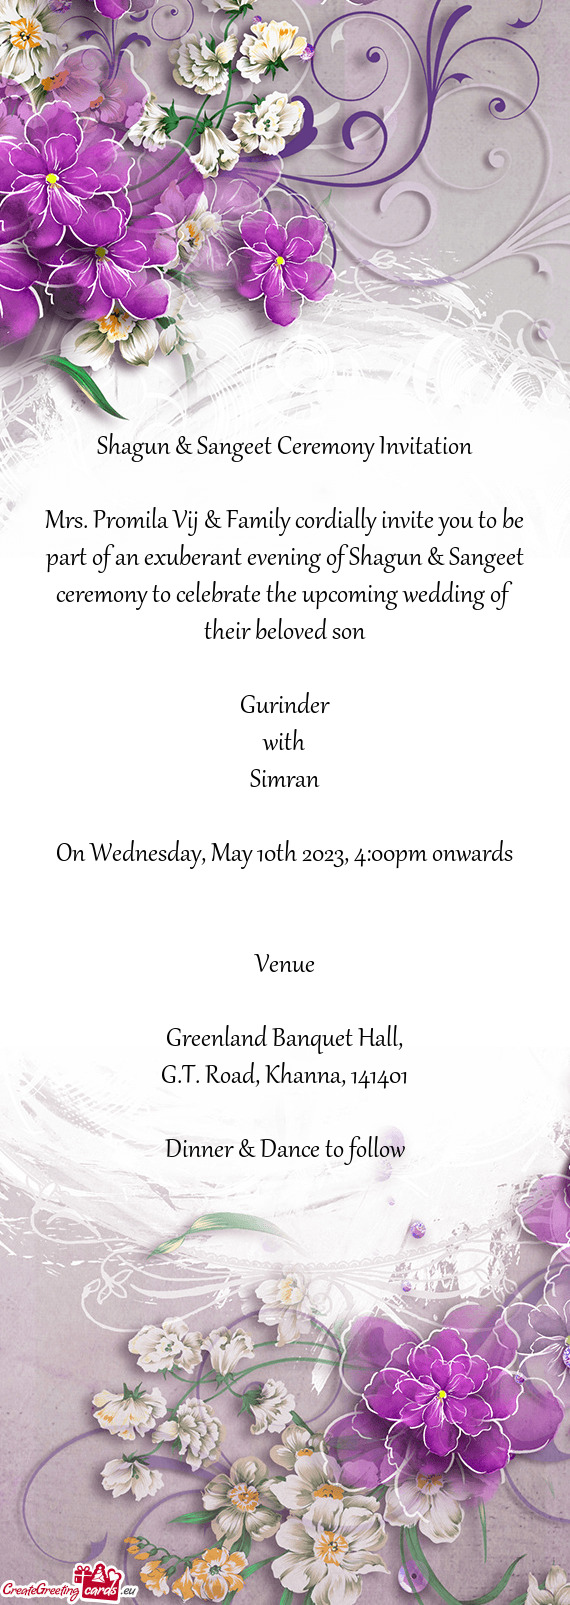 Mrs. Promila Vij & Family cordially invite you to be part of an exuberant evening of Shagun & Sangee